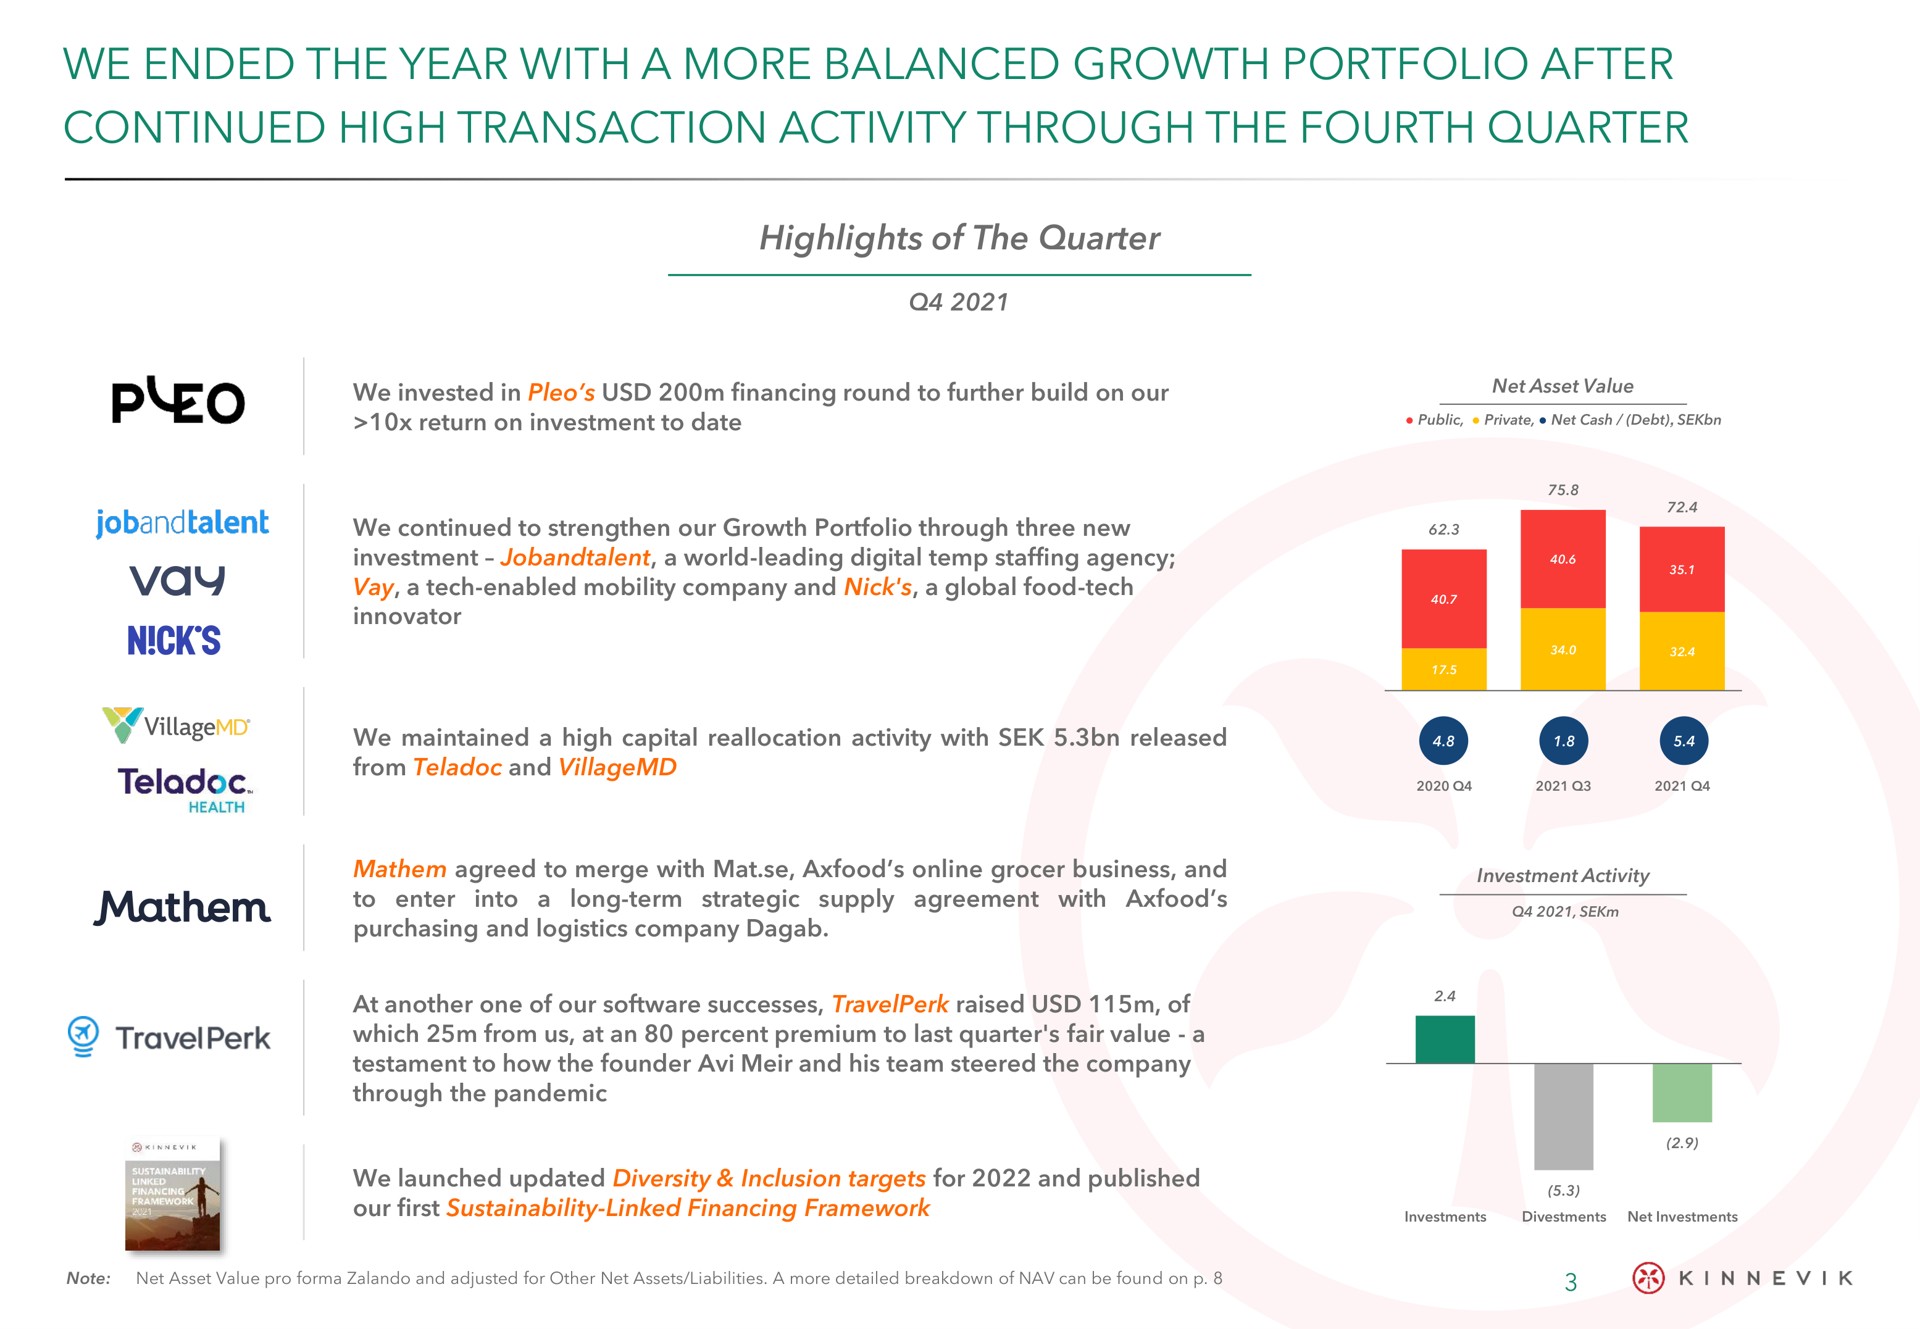 we ended the year with a more balanced growth portfolio after continued high transaction activity through the fourth quarter | Kinnevik